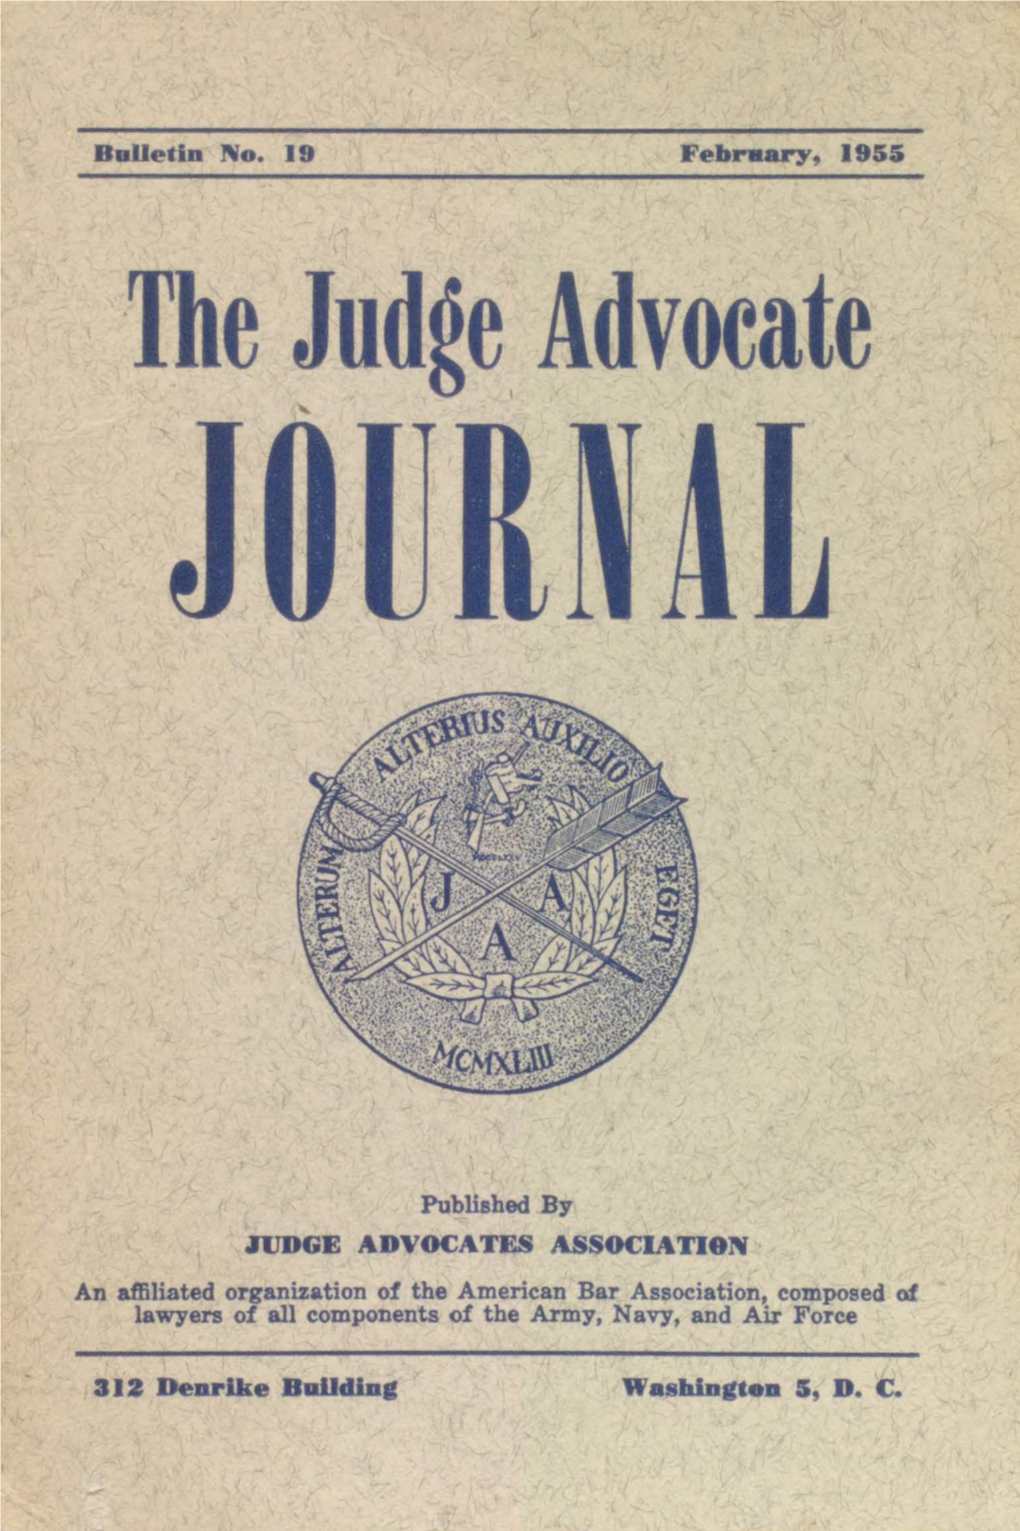 The Judge Advocate Journal, Bulletin No. 19, February, 1955